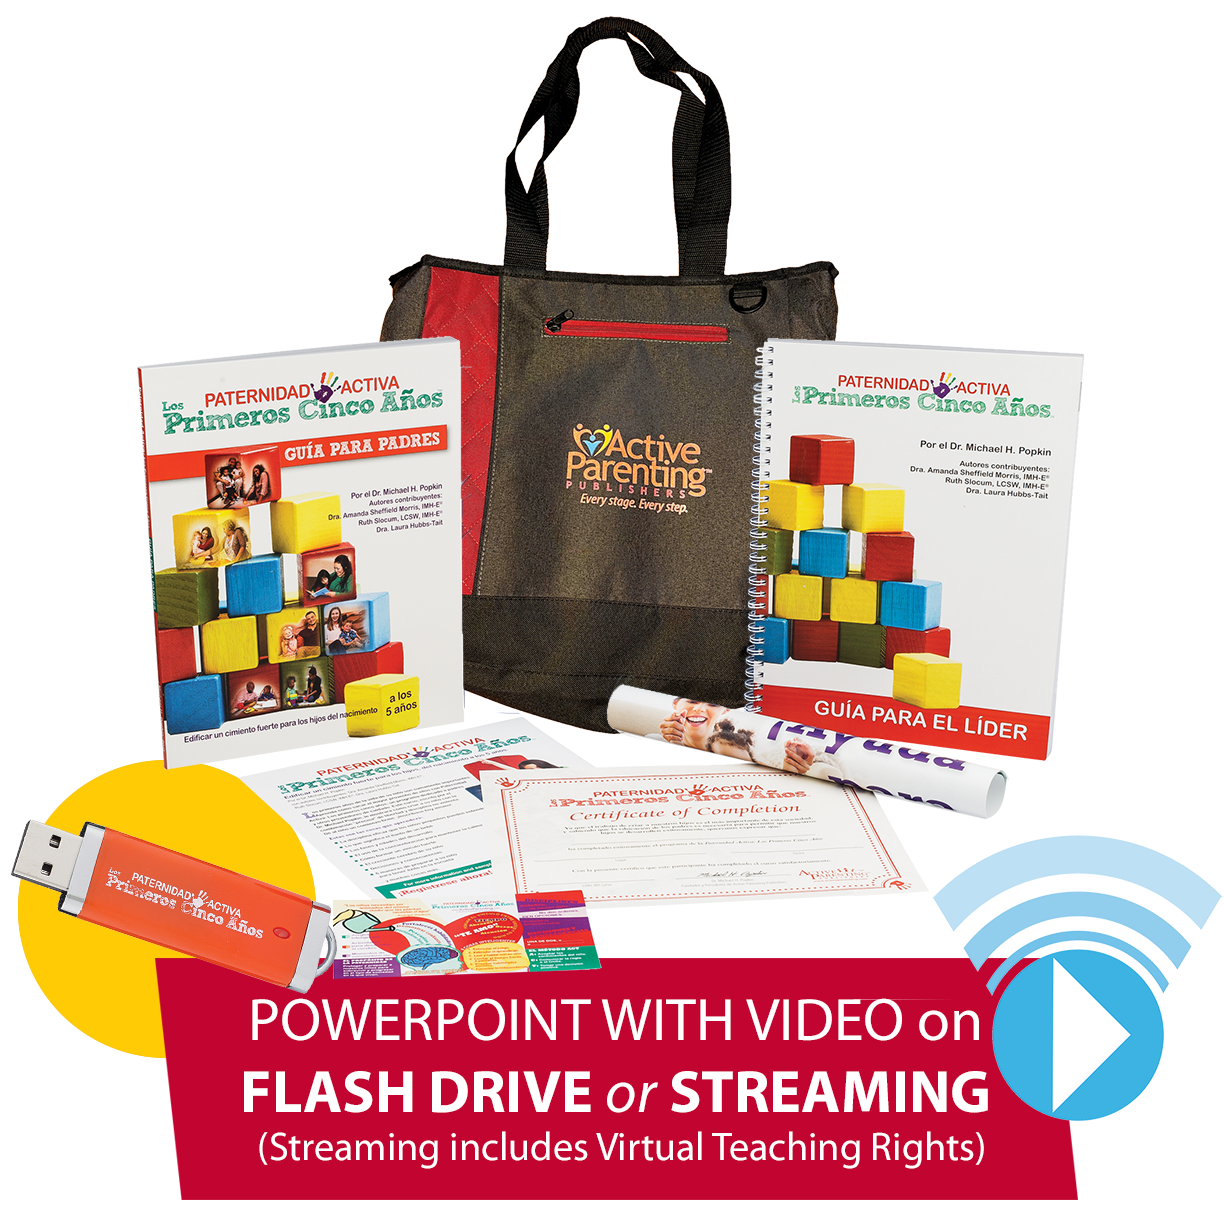 Paternidad Activa: Los Primeros Cinco Años (Active Parenting: First Five Years) Program Kit on Flash Drive or Streaming